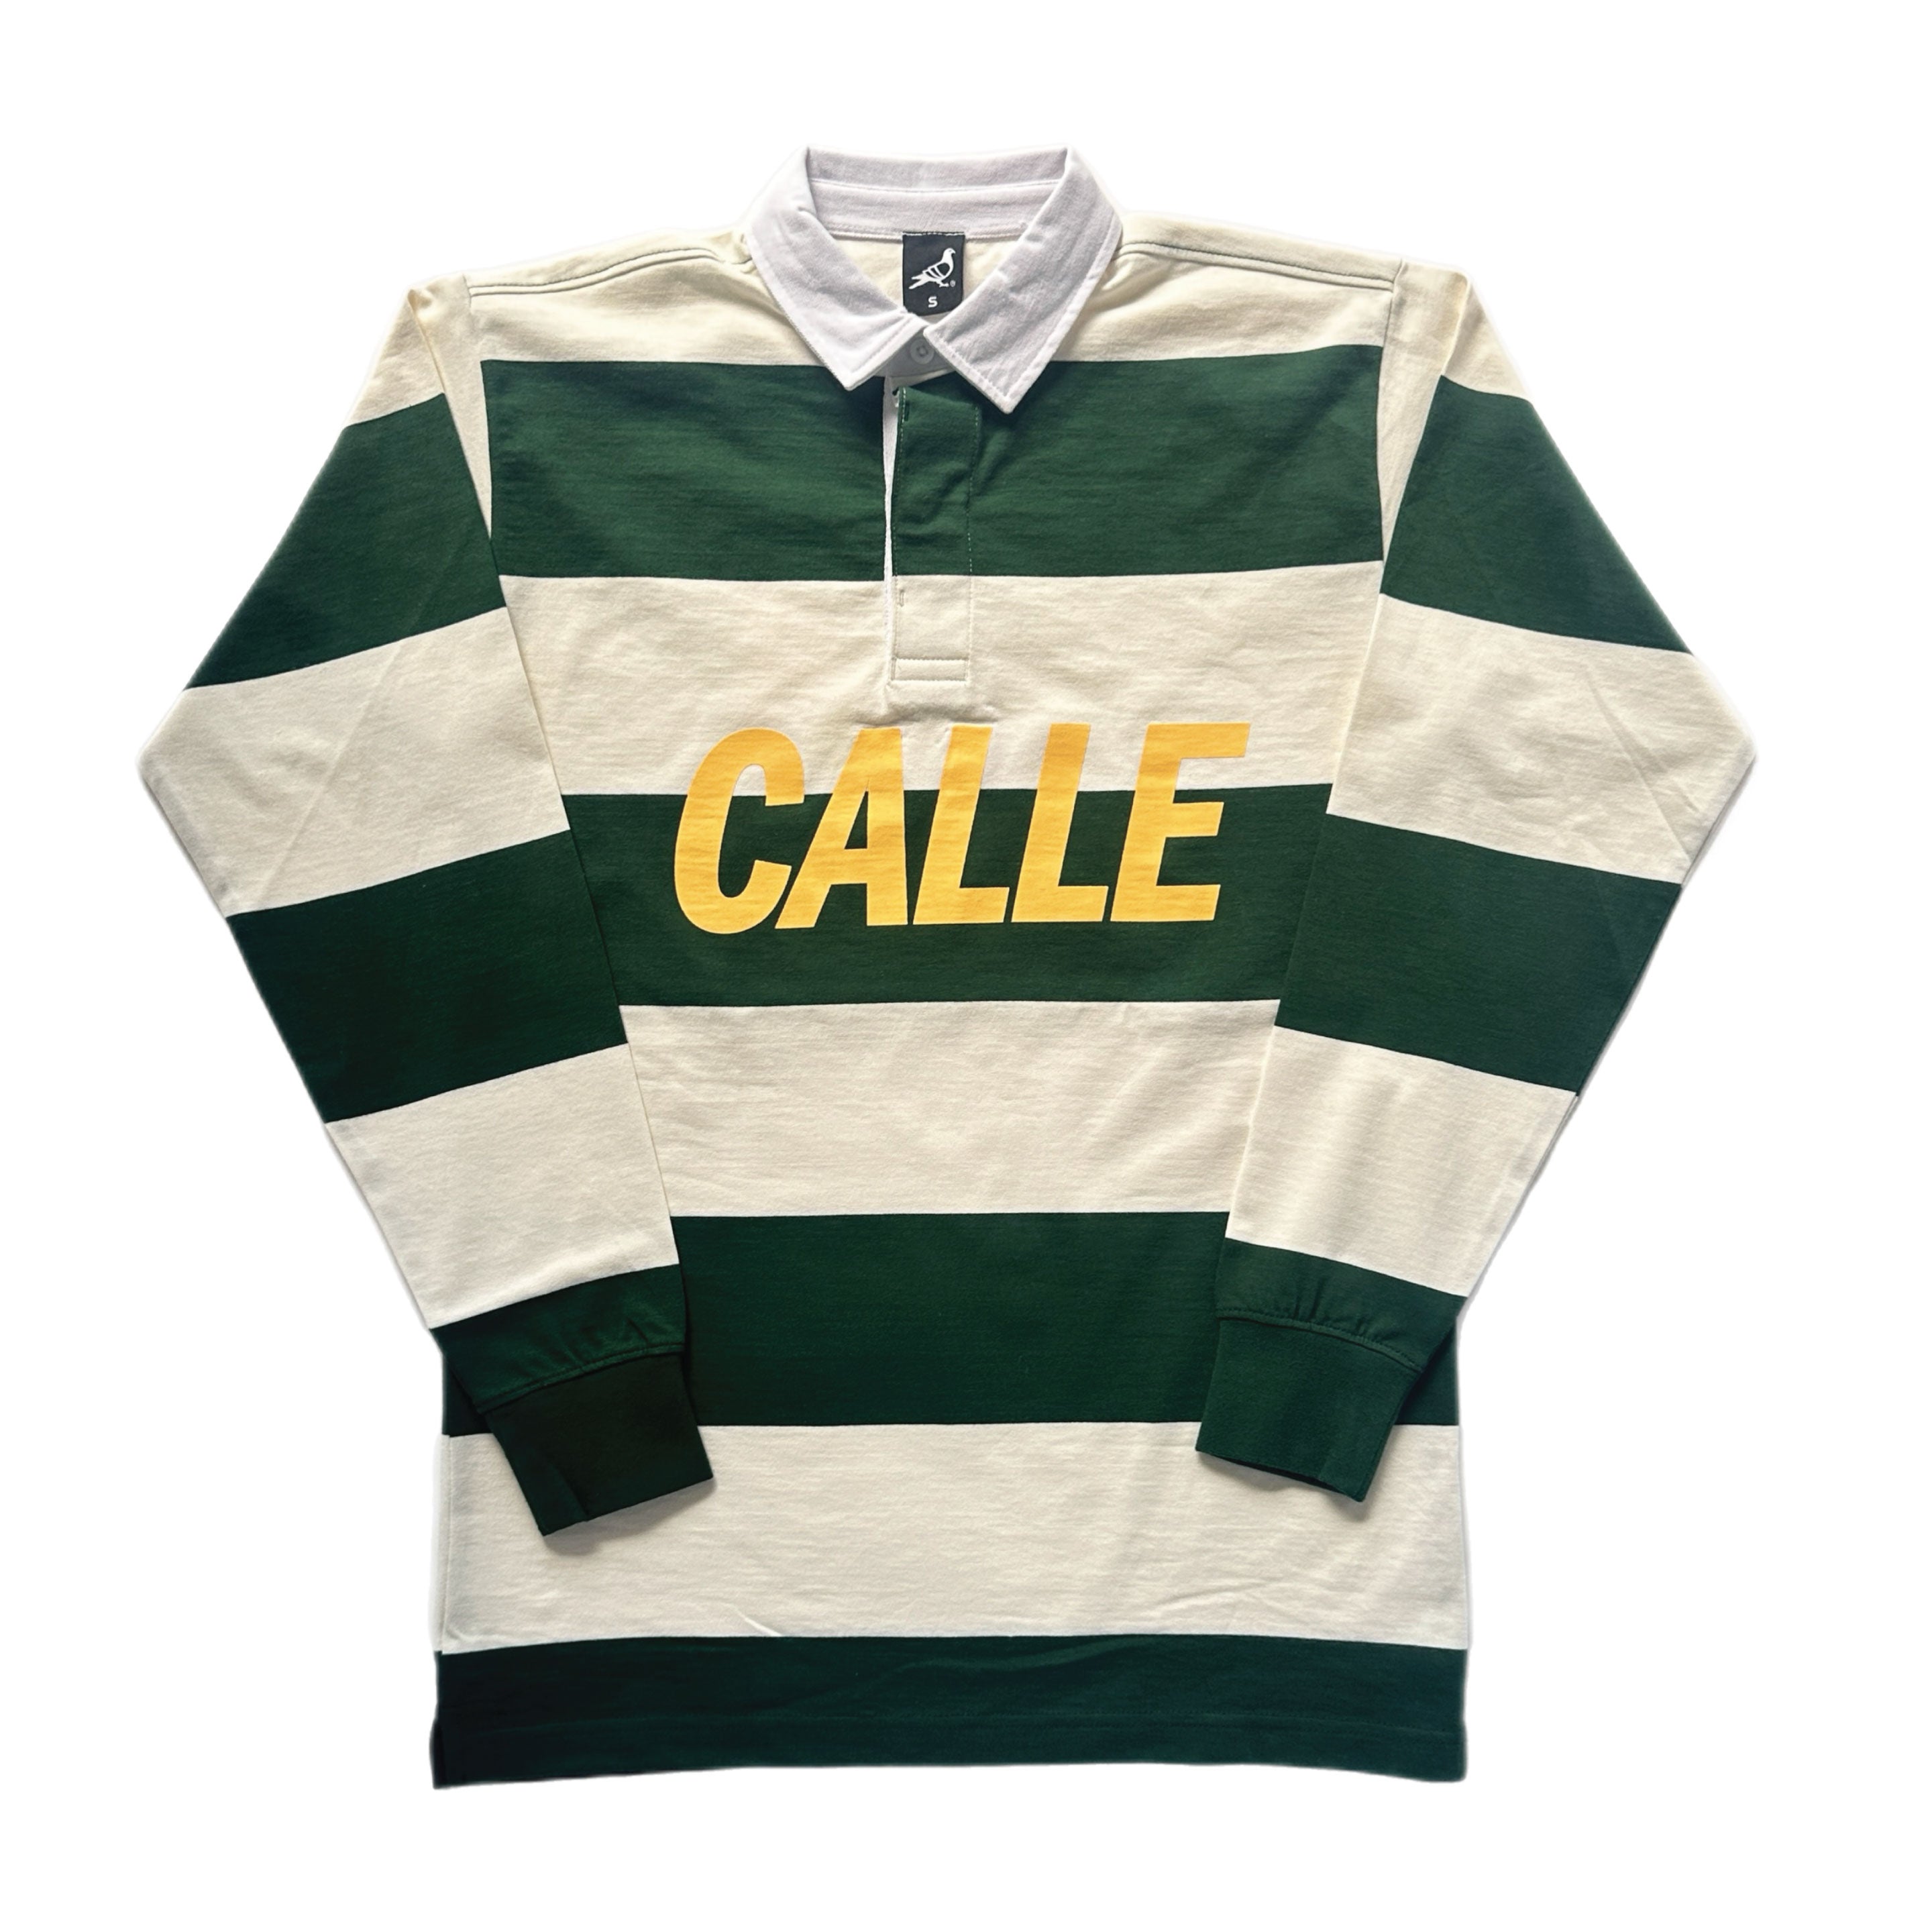 Calle Rugby Shirt